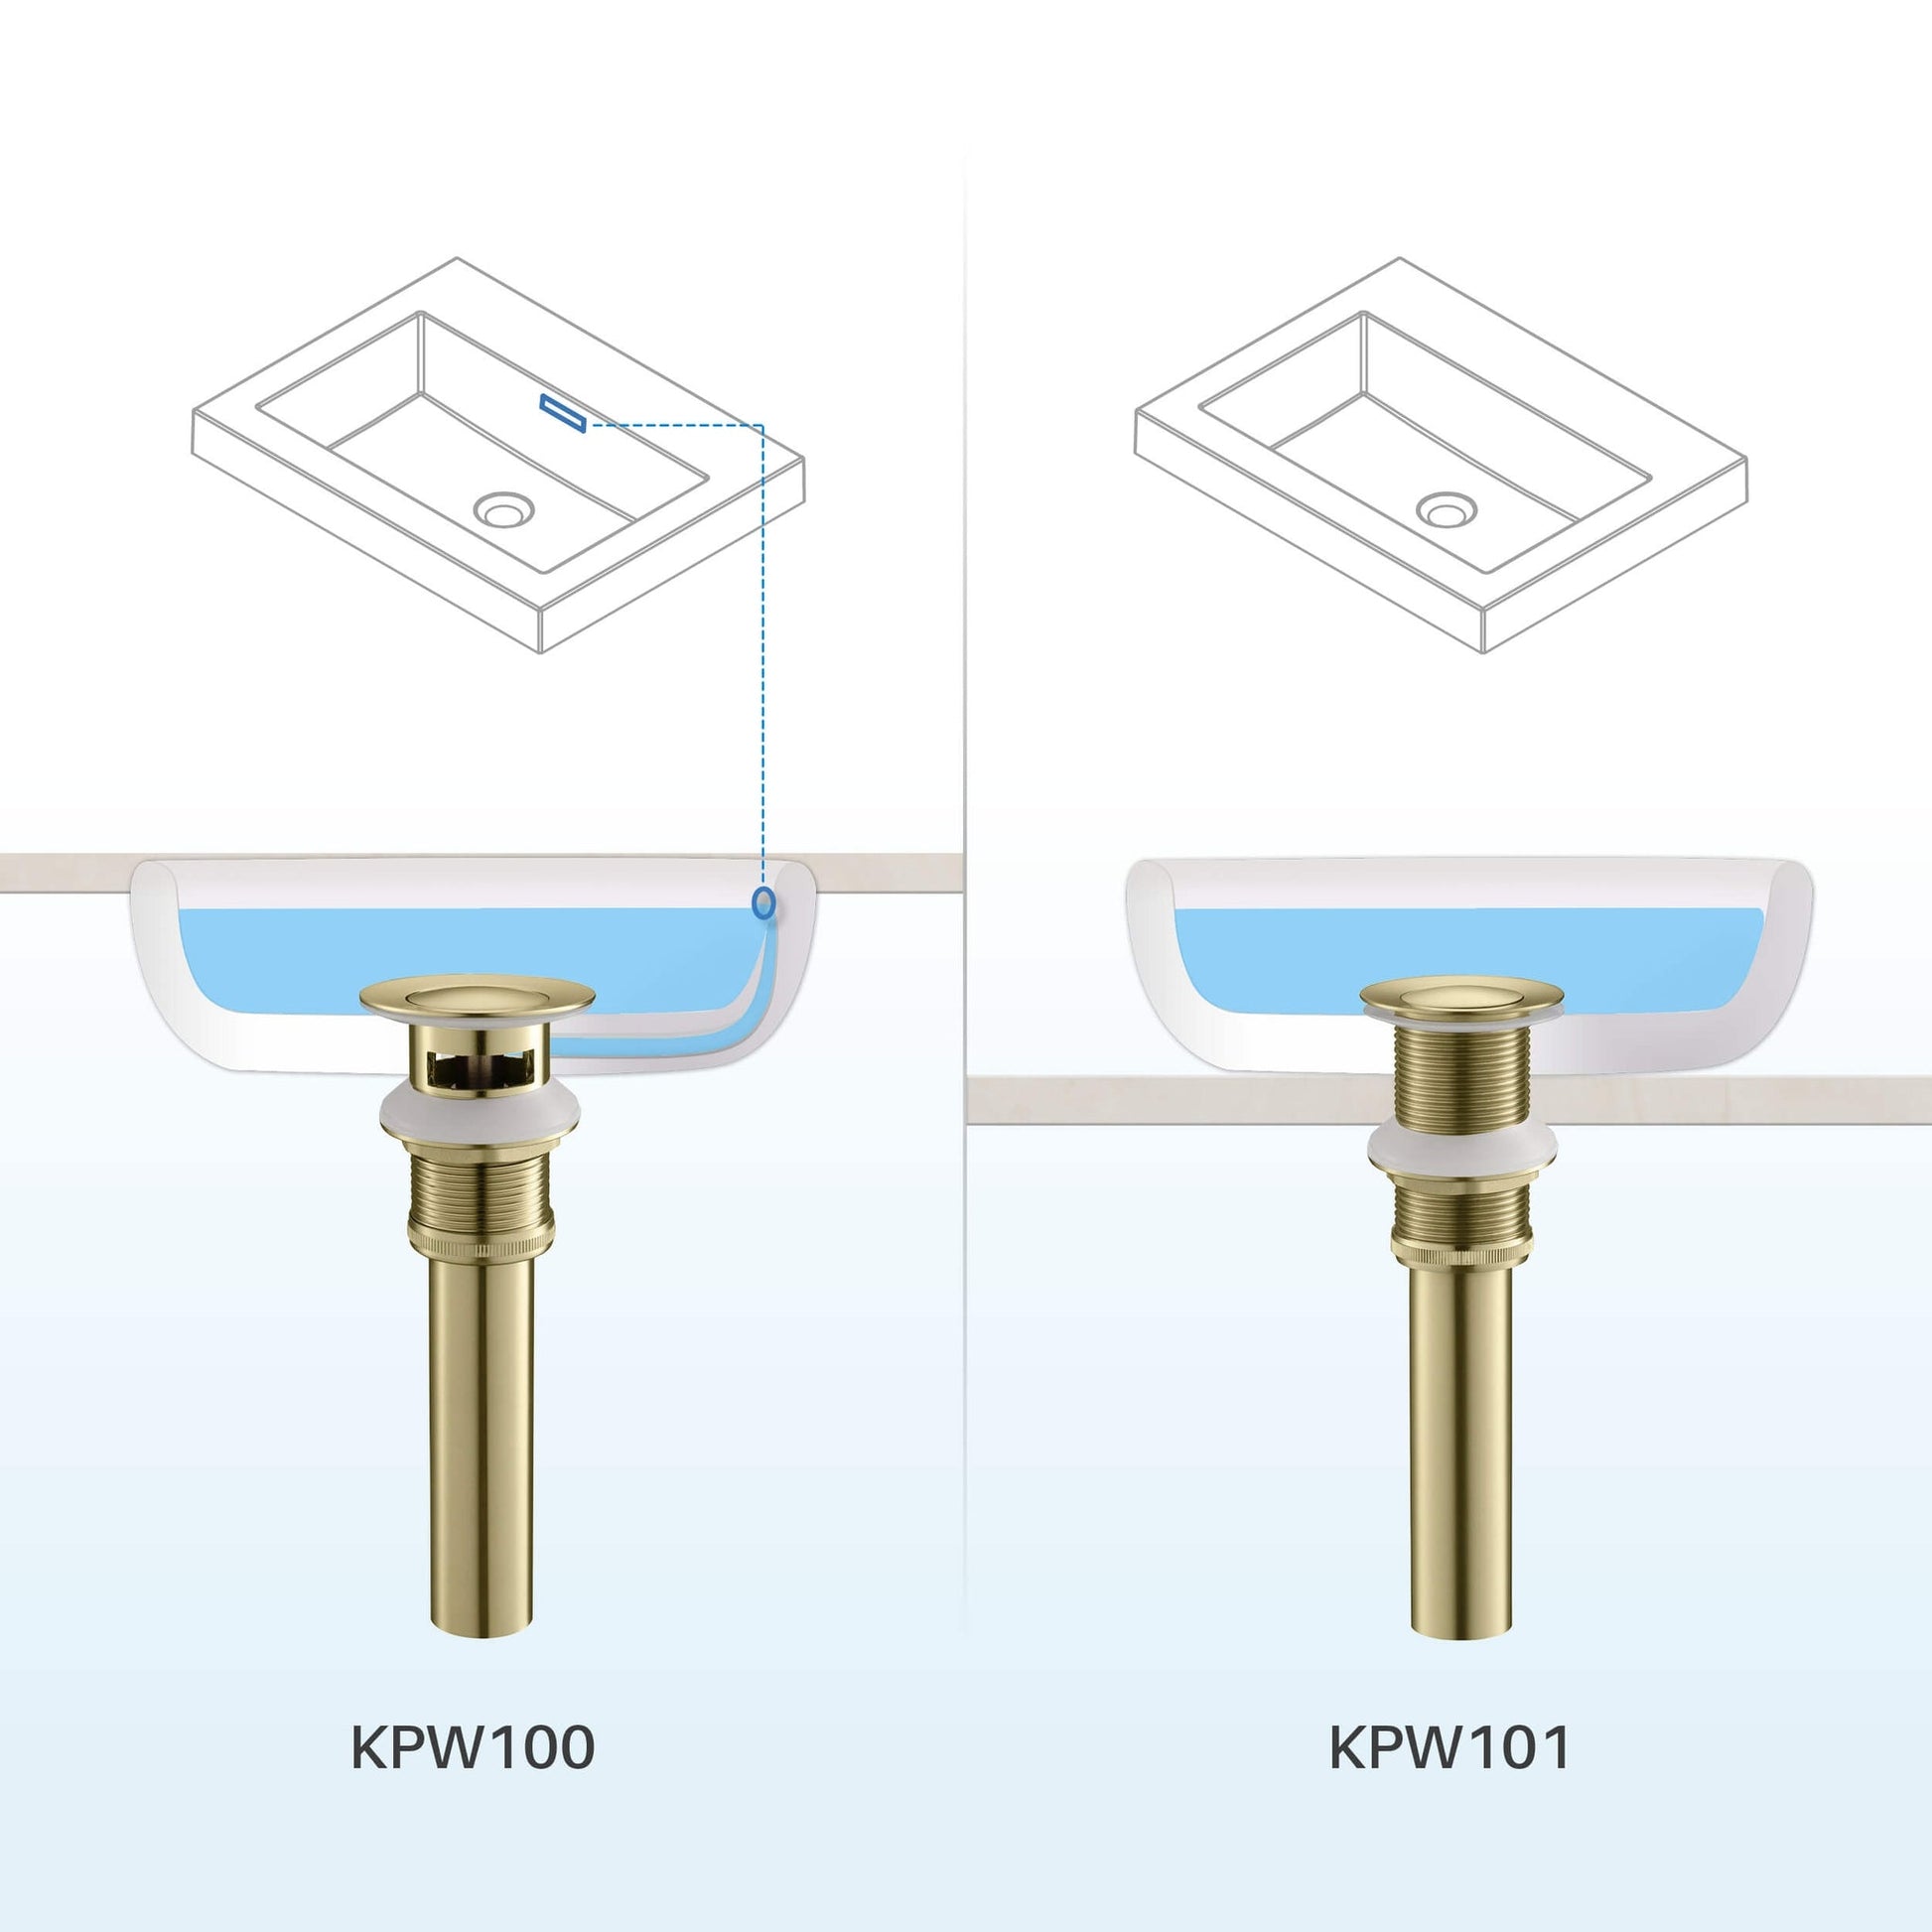 KIBI Tender Single Handle Brushed Gold Solid Brass Bathroom Sink Faucet With Pop-Up Drain Stopper Small Cover With Overflow